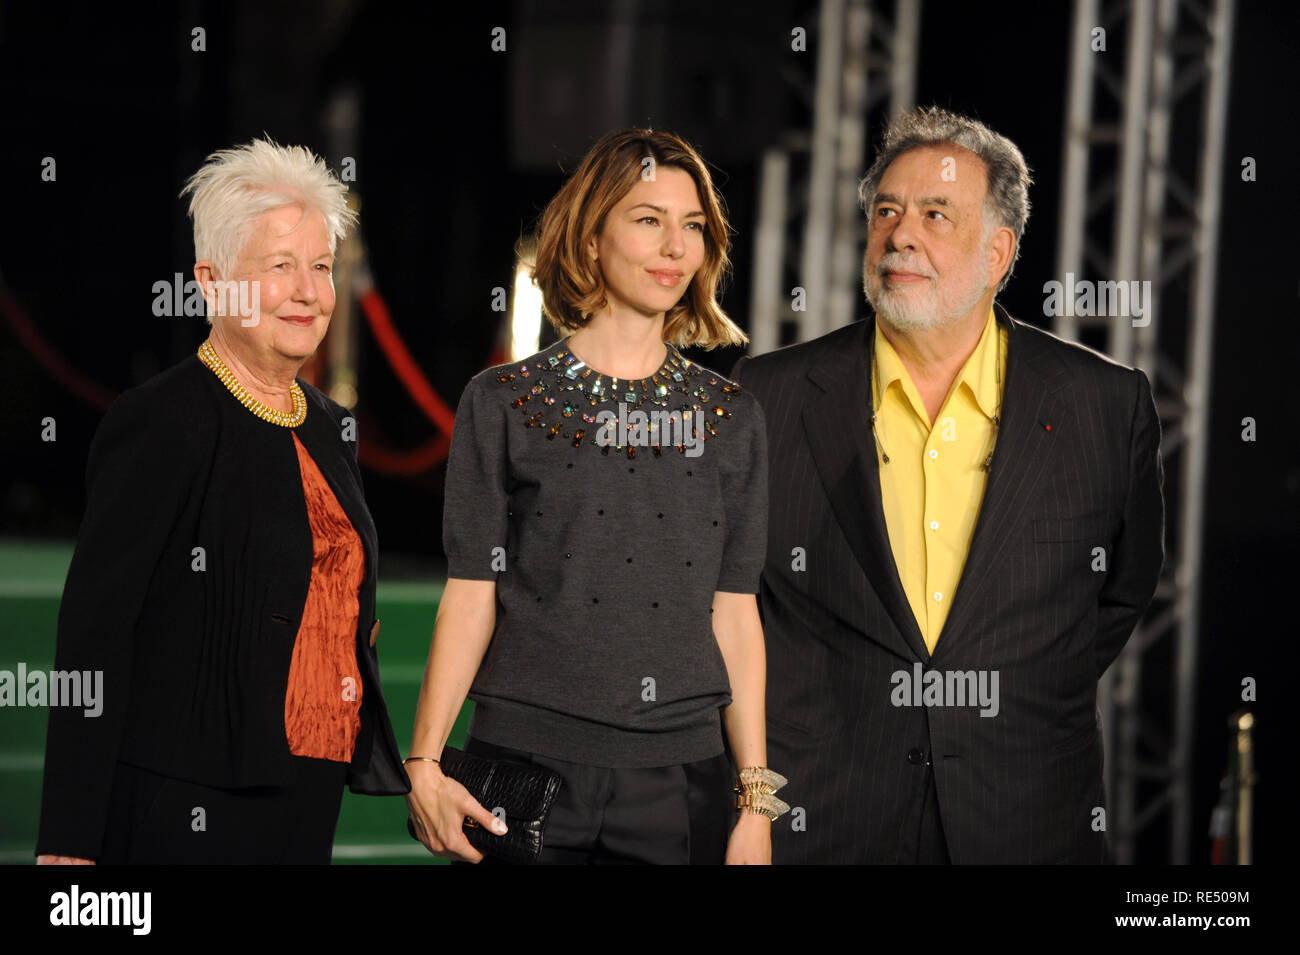 Elenor Coppola, Sofia Coppola and Francis Ford Coppola attend the 26th Tokyo International Film Festival Opening Ceremony at Roppongi Hills in Tokyo, Japan Oct. 17, 2013. Stock Photo